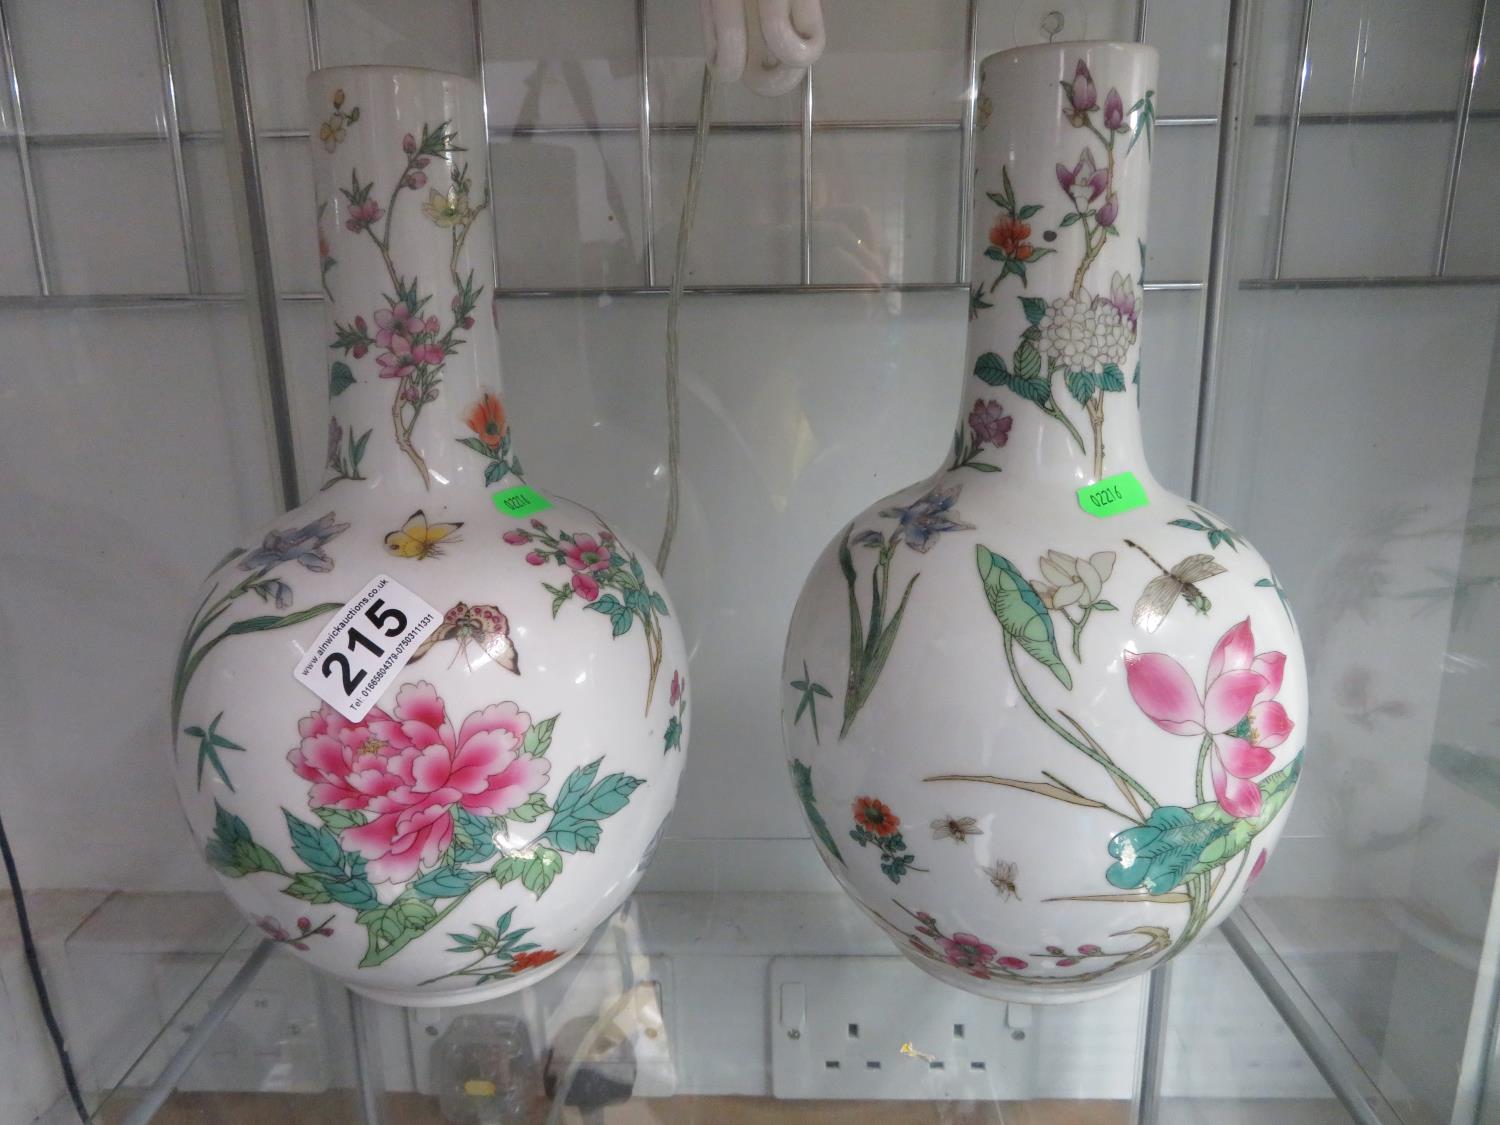 2x Japanese/Chinese vases with dragonflies - perfect condition